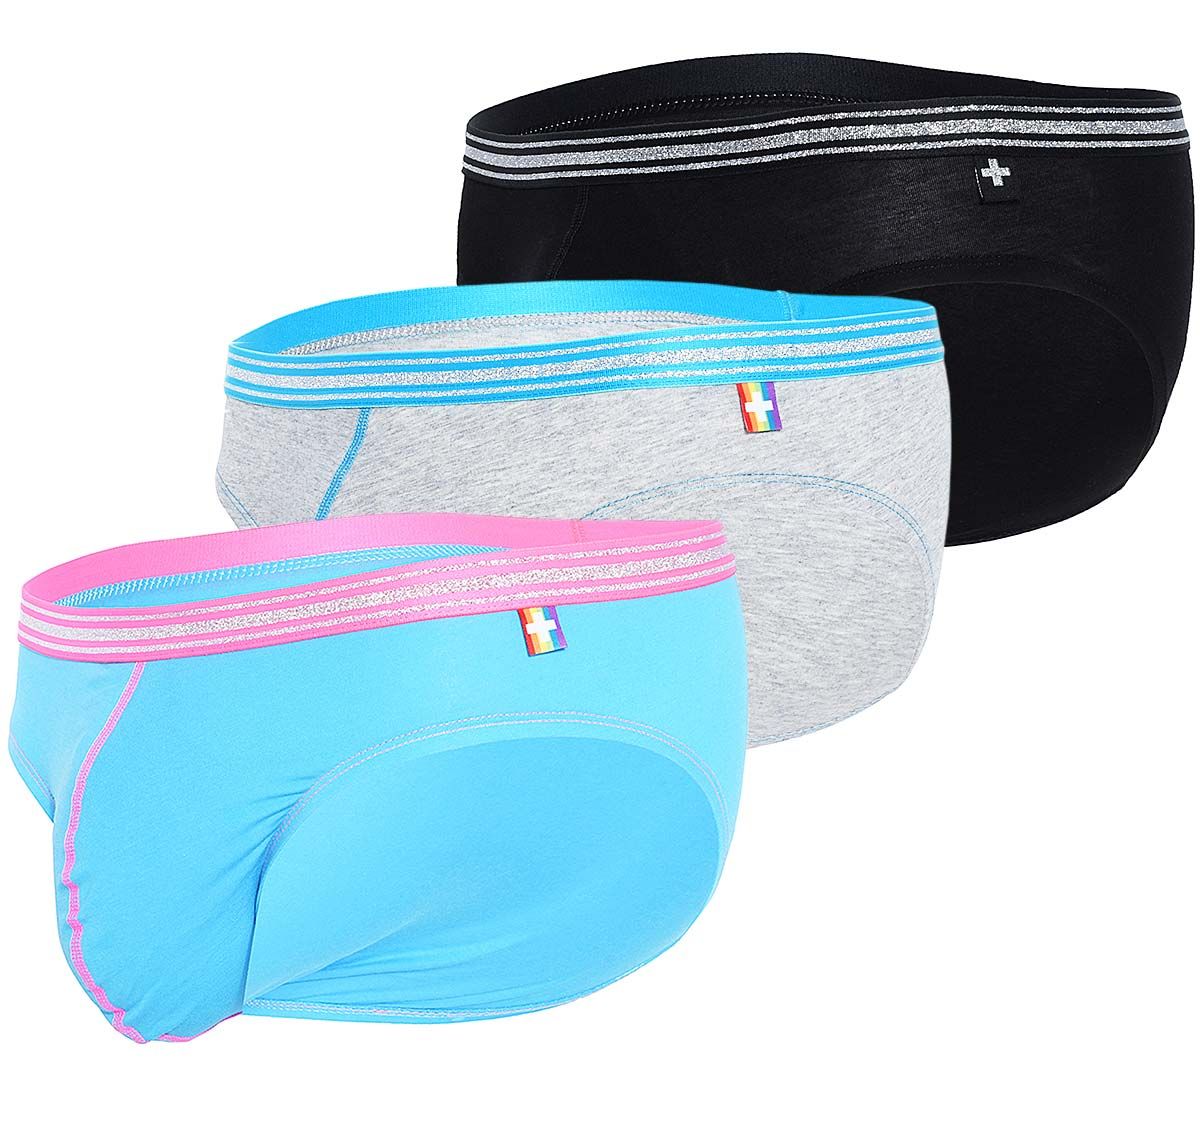 Andrew Christian 3 Paquet Slips BOY BRIEF UNICORN 3-PACK w/Almost Naked 91440, noir/bleu/gris